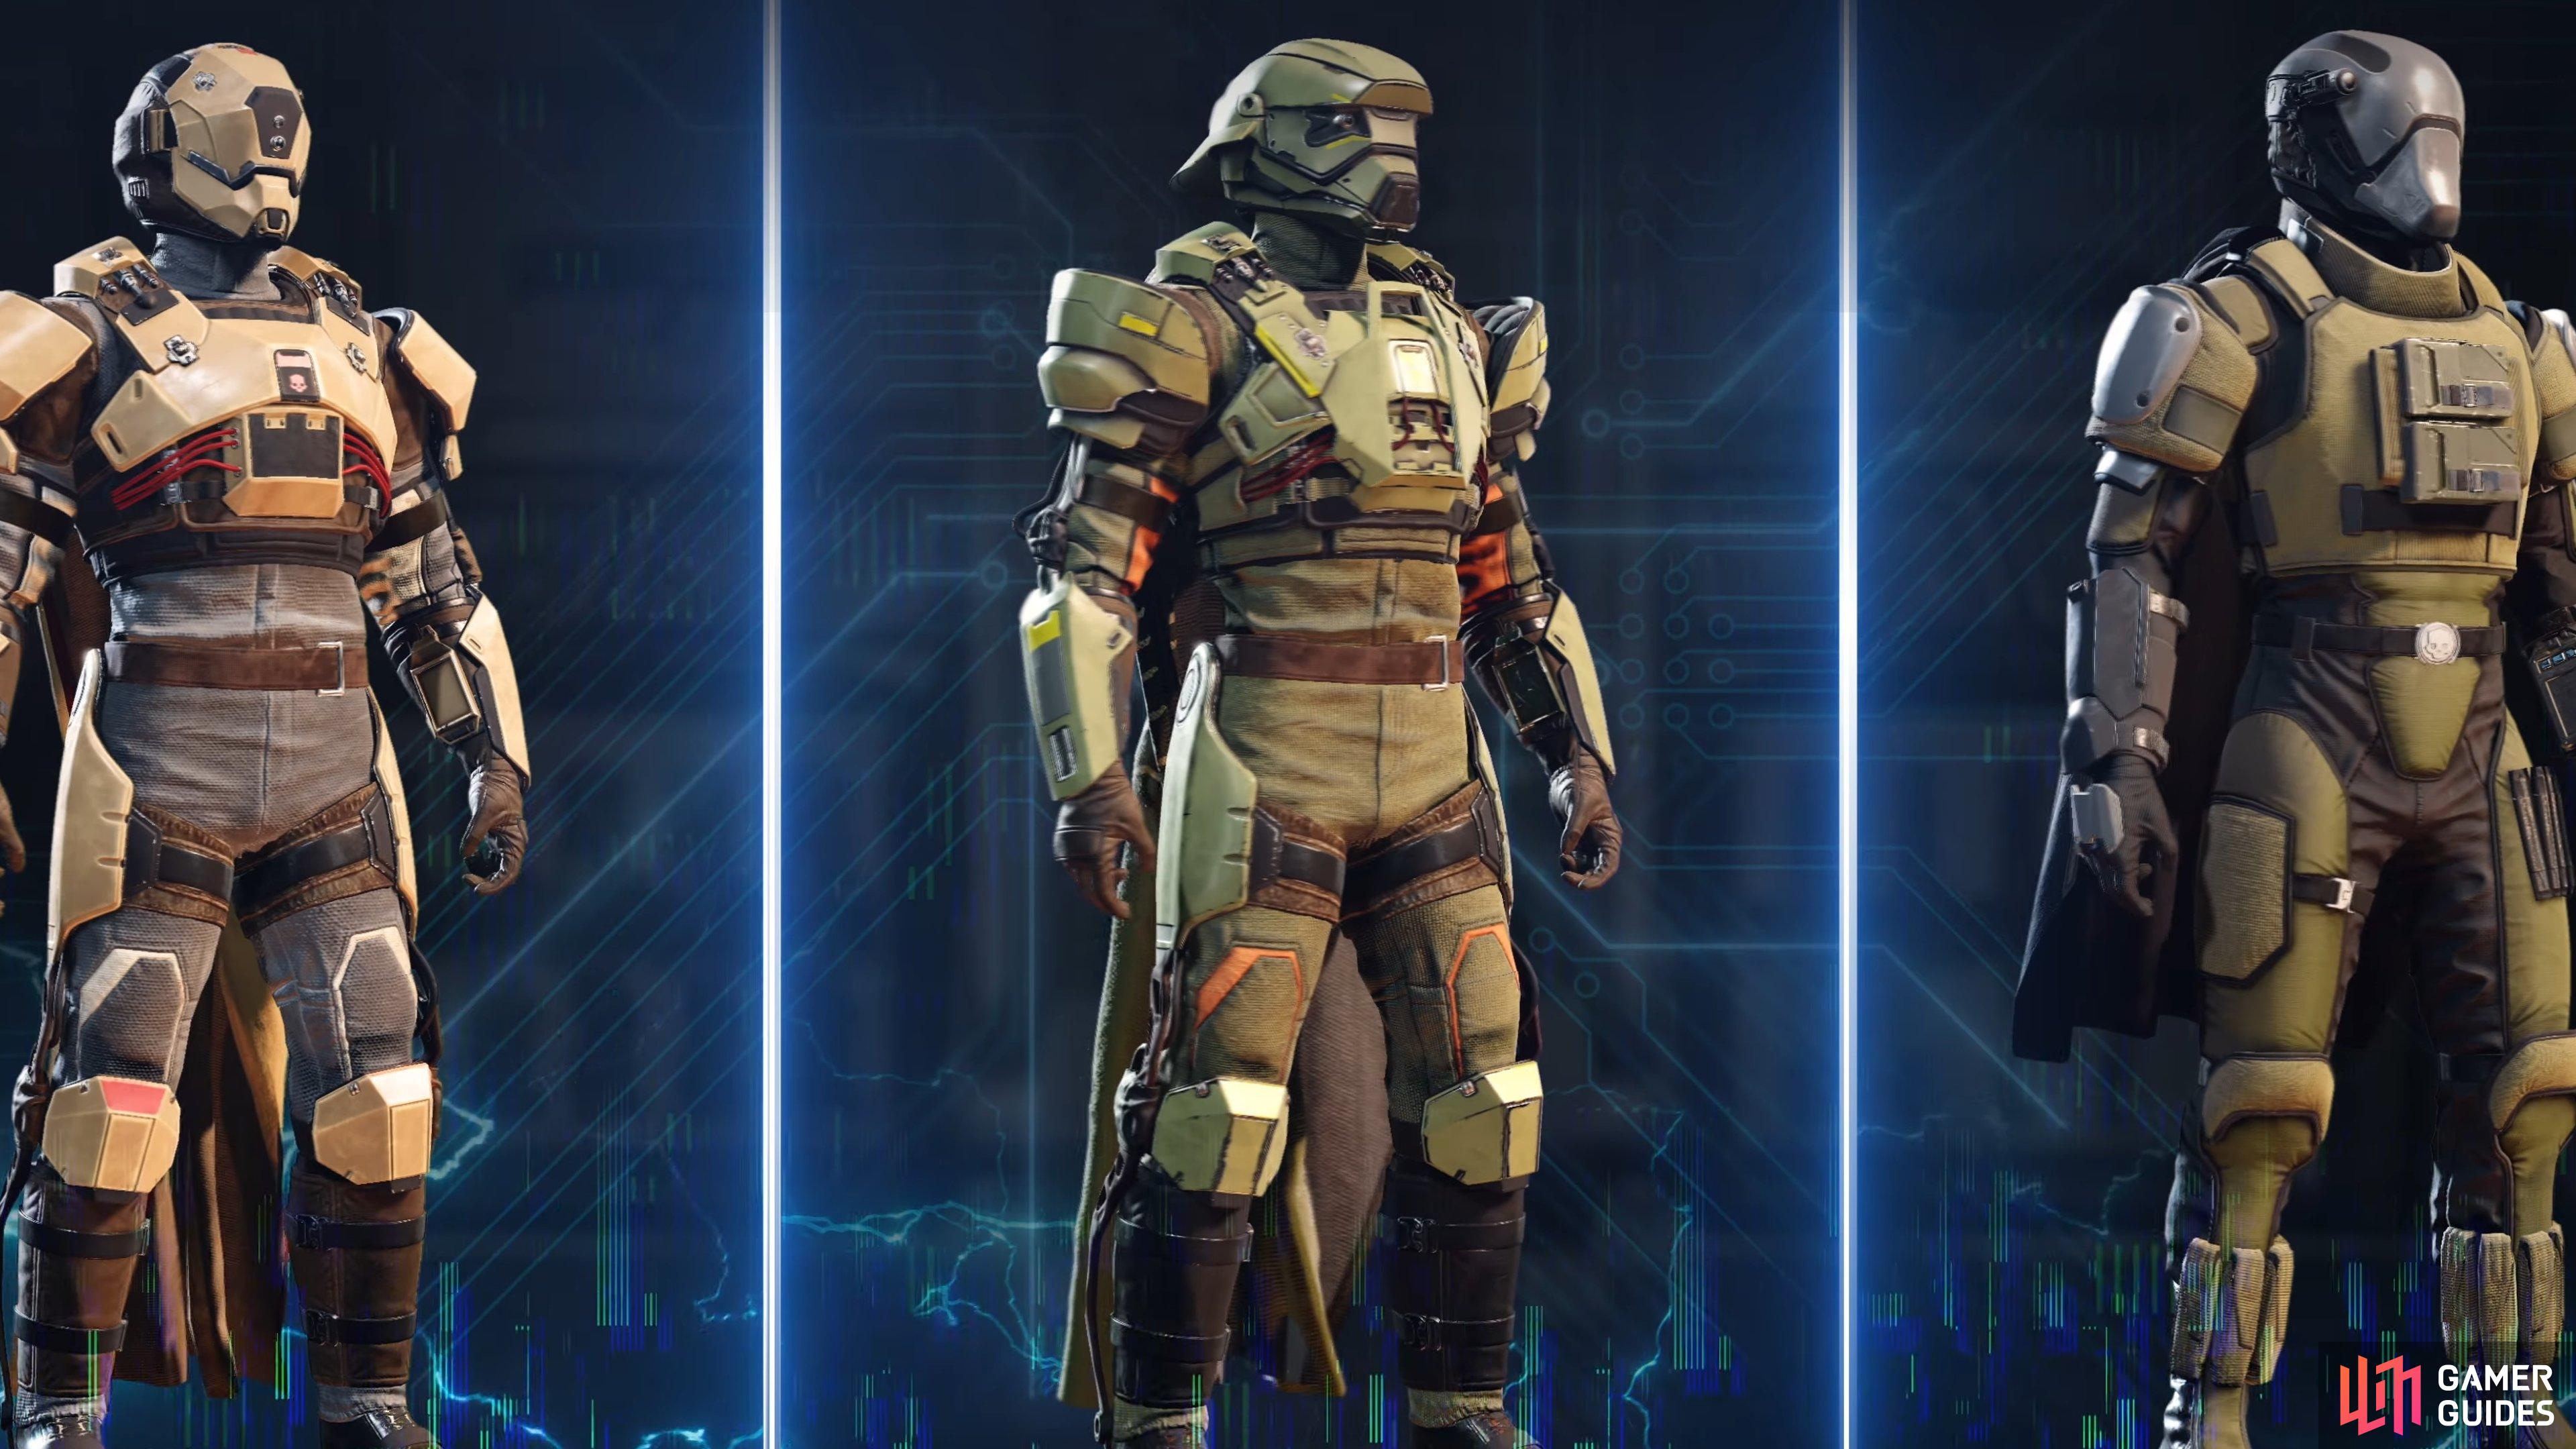 The EX-03, EX-16, and EX-00 are shown in the image and look rather unique compared to the other armor in the game right now. 